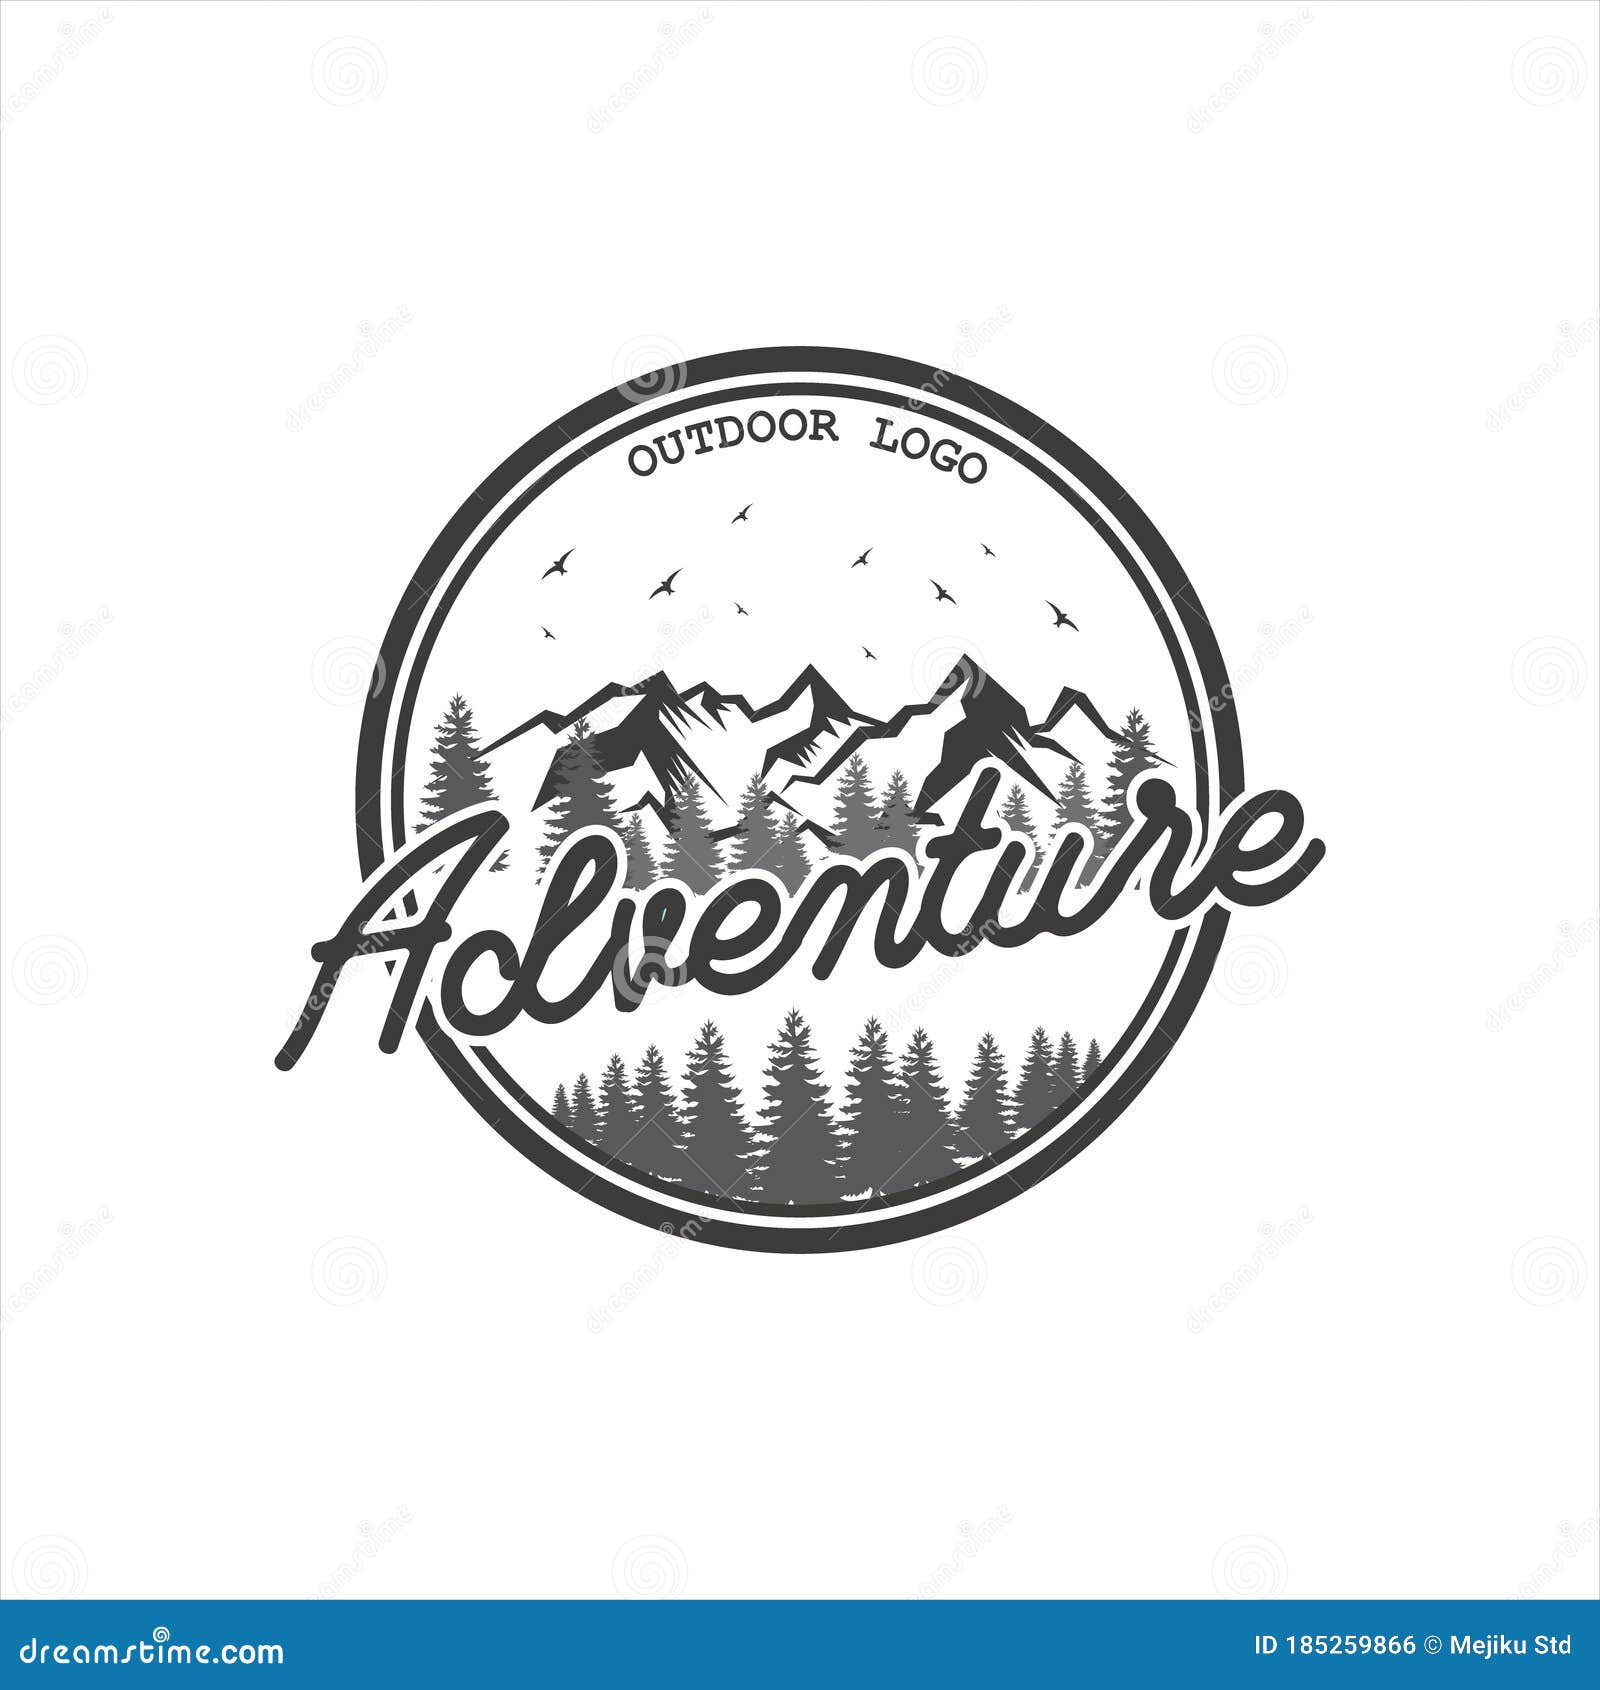 vintage outdoor adventure logos and nature expeditions